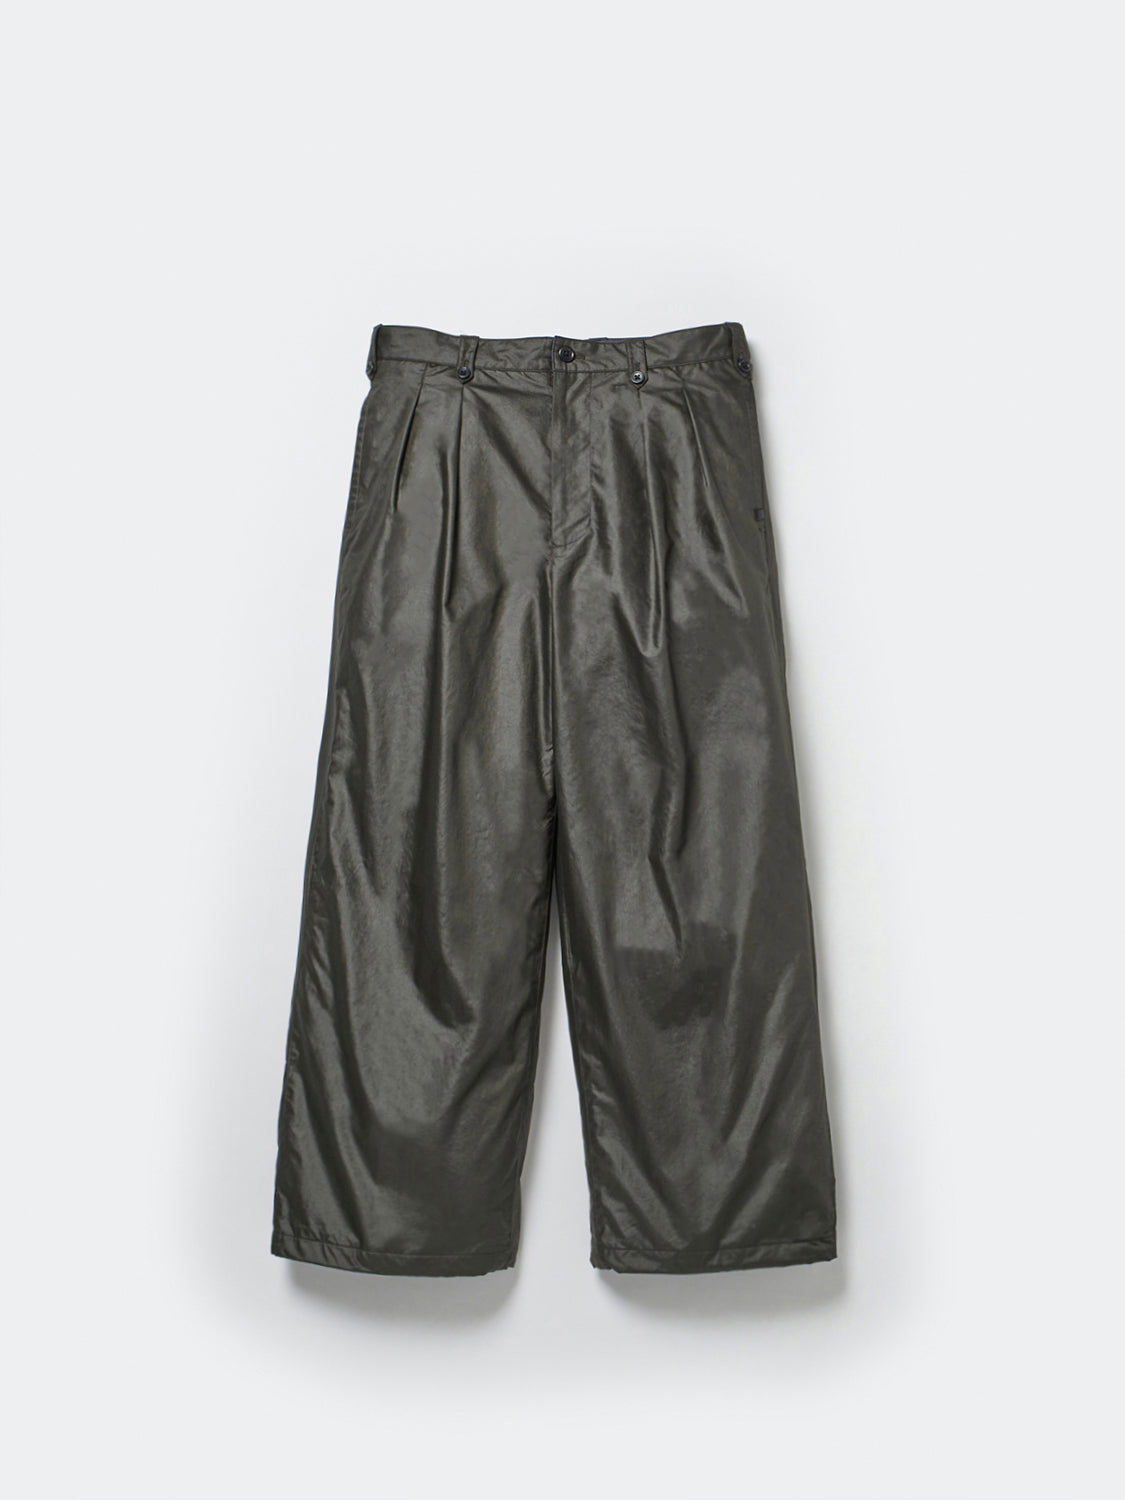 DAIWA PIER39 TECH MIL OFFICER PANTS – unexpected store